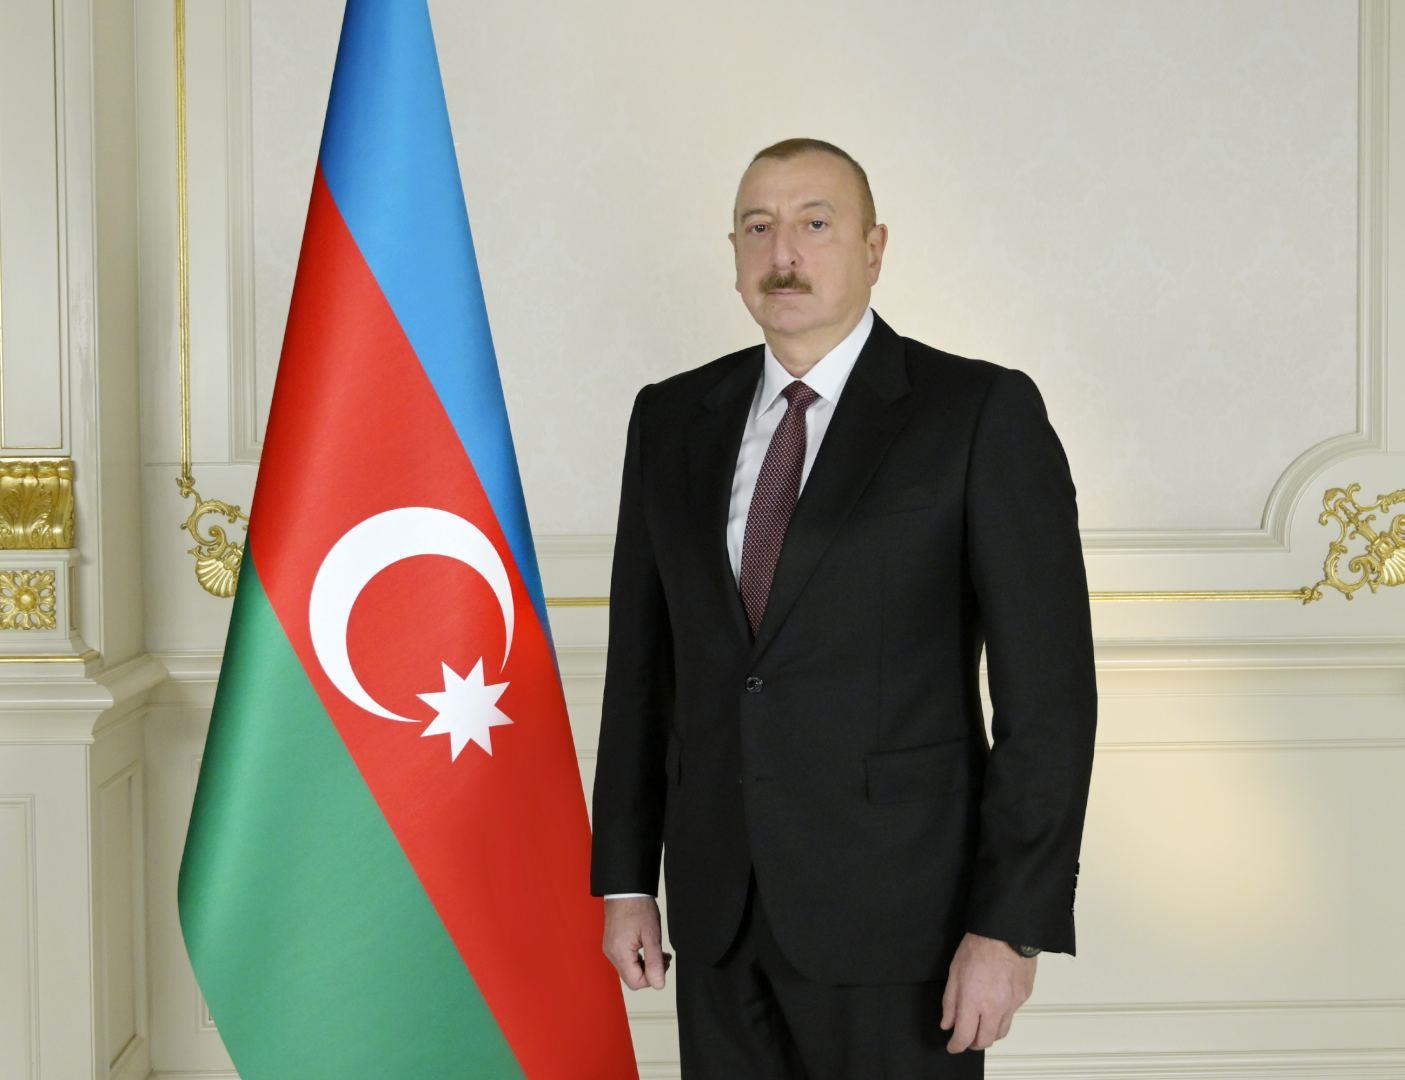 France Ranks Among The Leading Nations Globally In Terms Of Landmine Use, Next Comes Armenia - President Ilham Aliyev